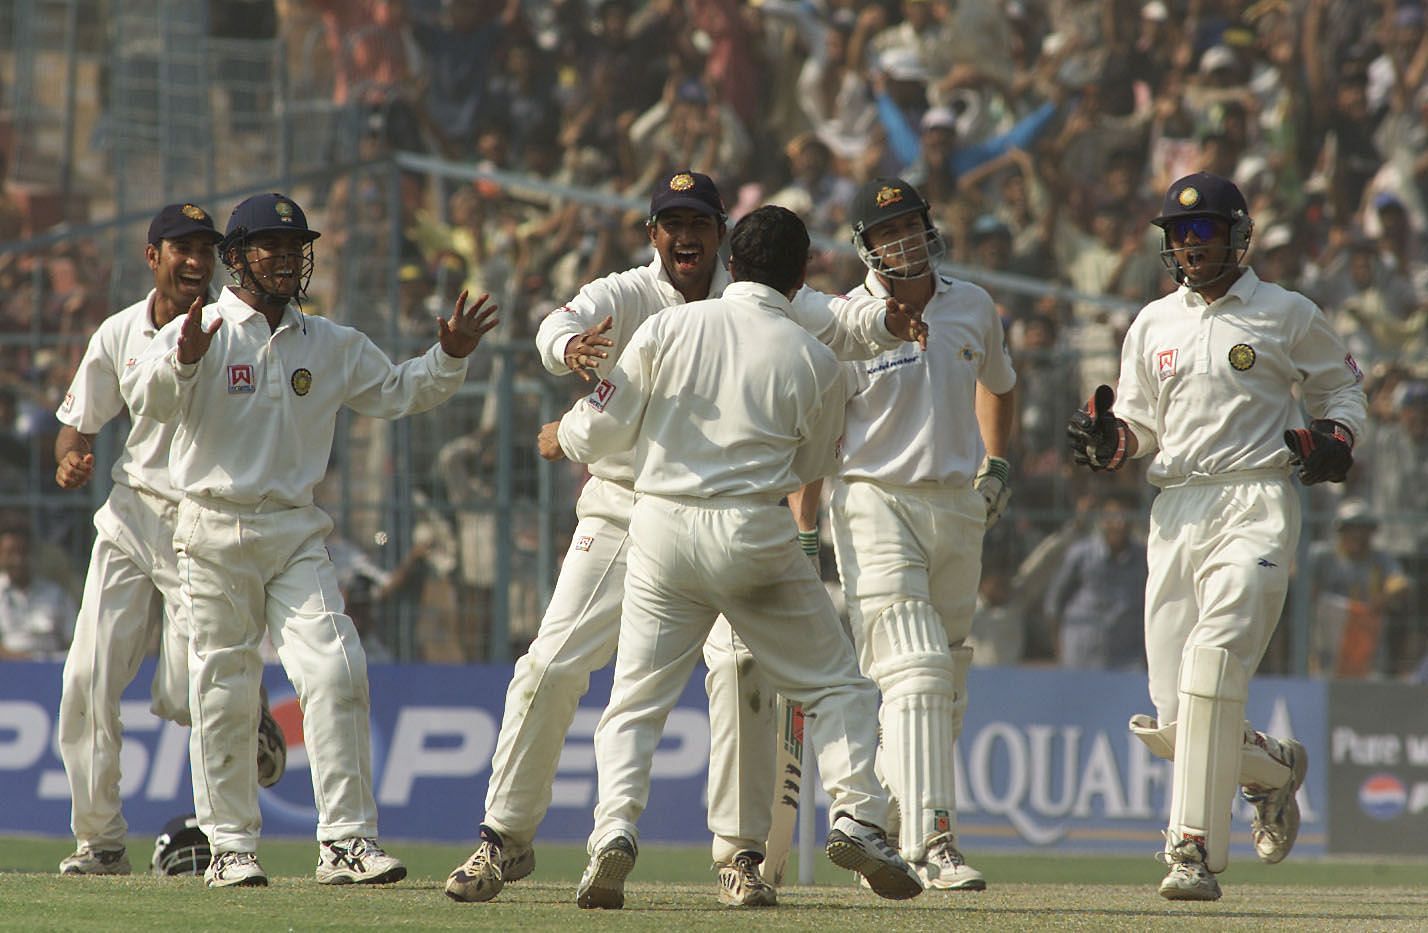 India fought back after being asked to follow on in the 2001 Kolkata Test. (Pic: Getty Images)